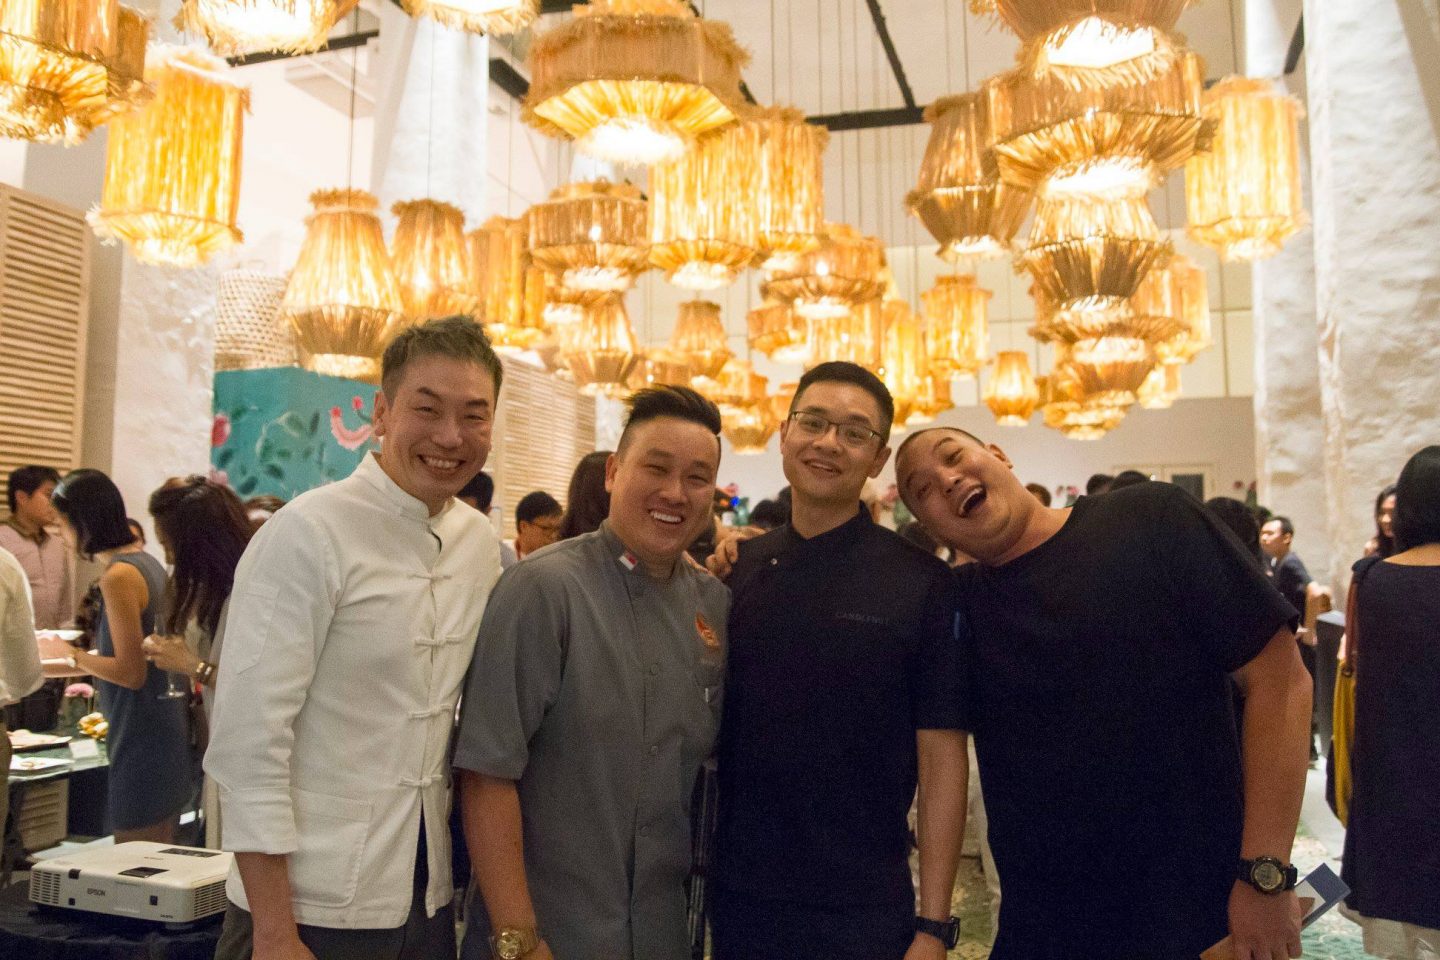 Malcolm has hosted numerous guest chefs in Candlenut's kitchen. He is pictured here with (left to right) Willin Low of Wild Rocket, Wayne Liew of KEK Seafood and Andrei Soen of Park Bench Deli, who took part in Candle's "8 years, 8 Hands" anniversary dinner on April 11, 2018.